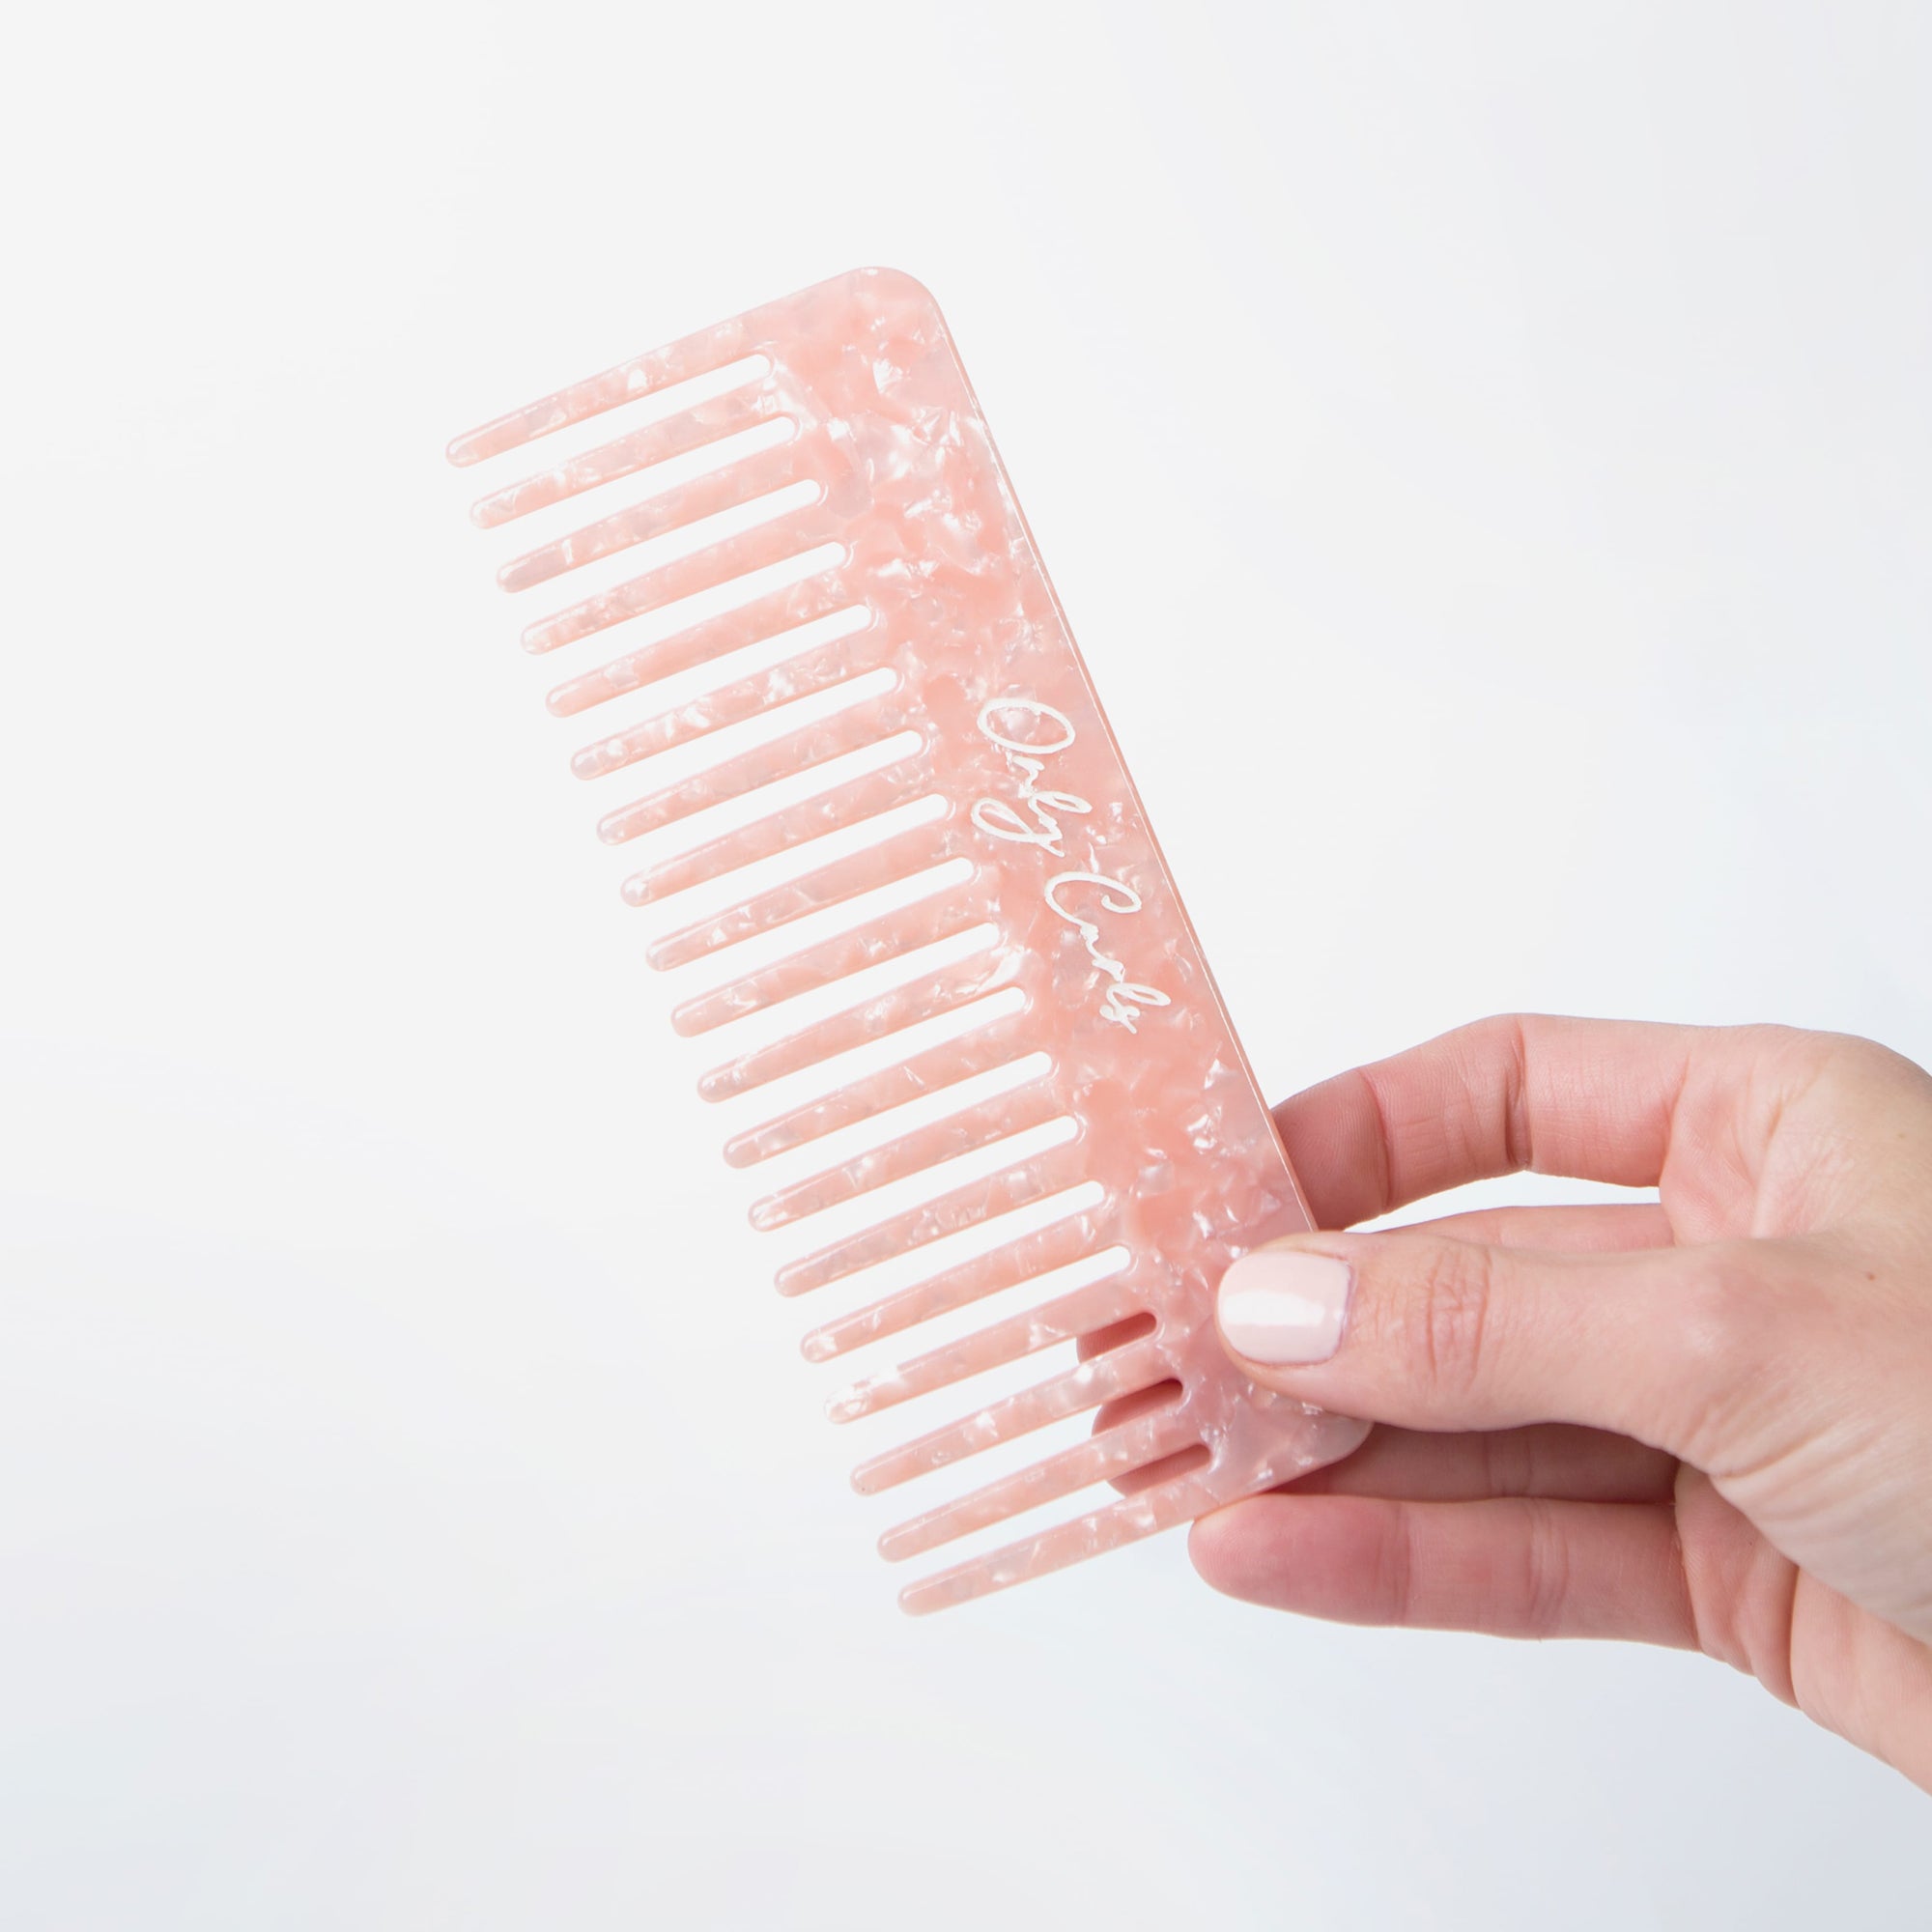 Only Curls Pink Shimmer Comb - Only Curls